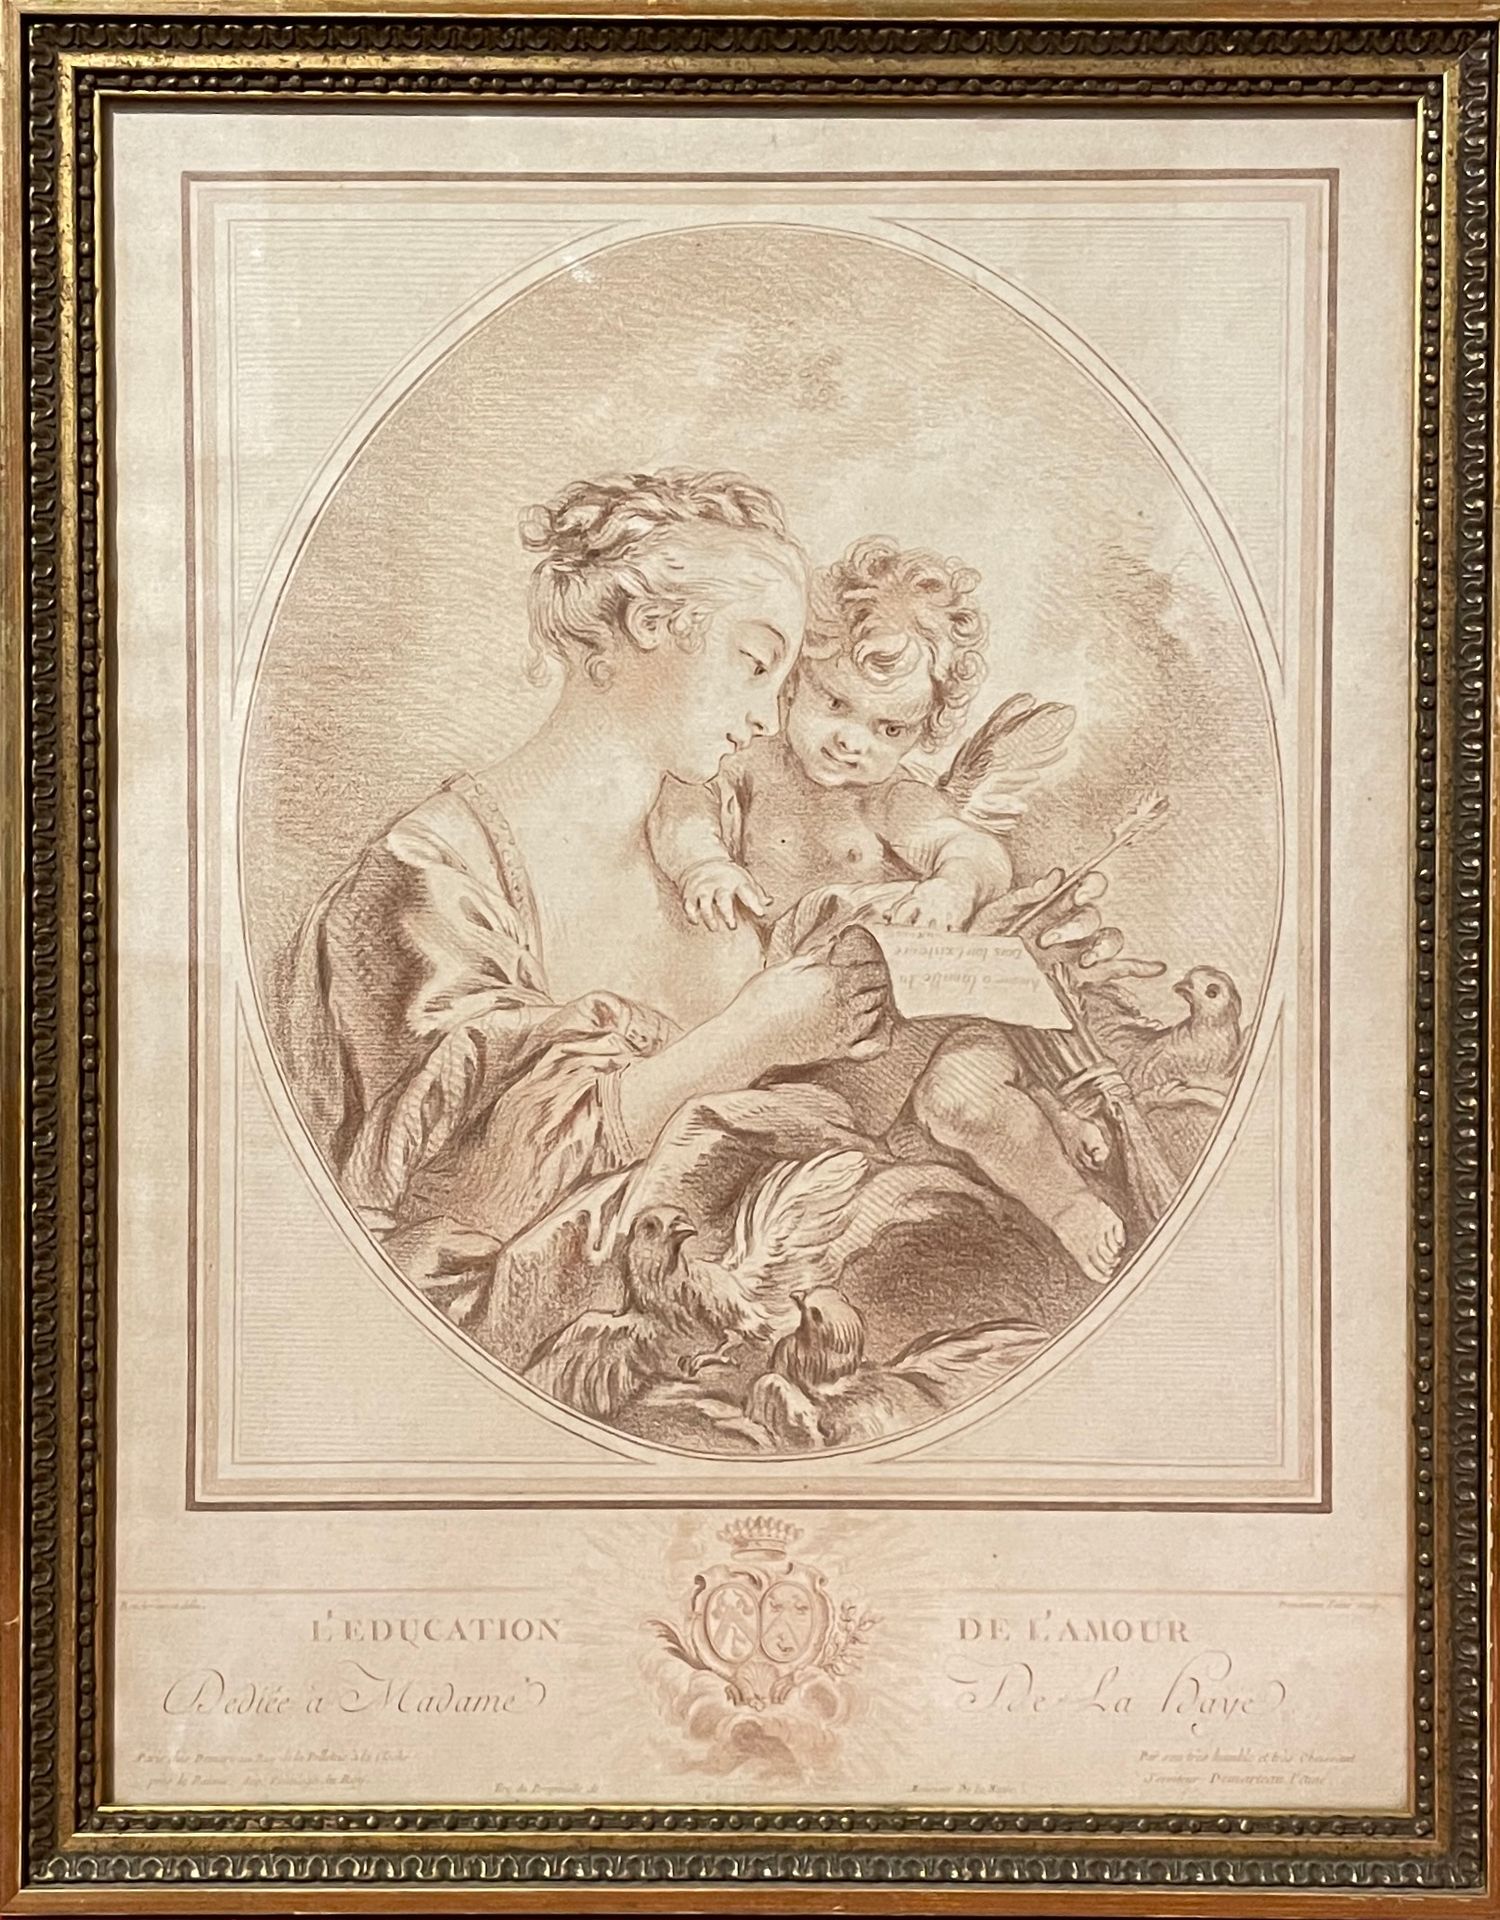 Null After Boucher LOVE AND CUPIDON

READING A LETTER

Blood lithograph